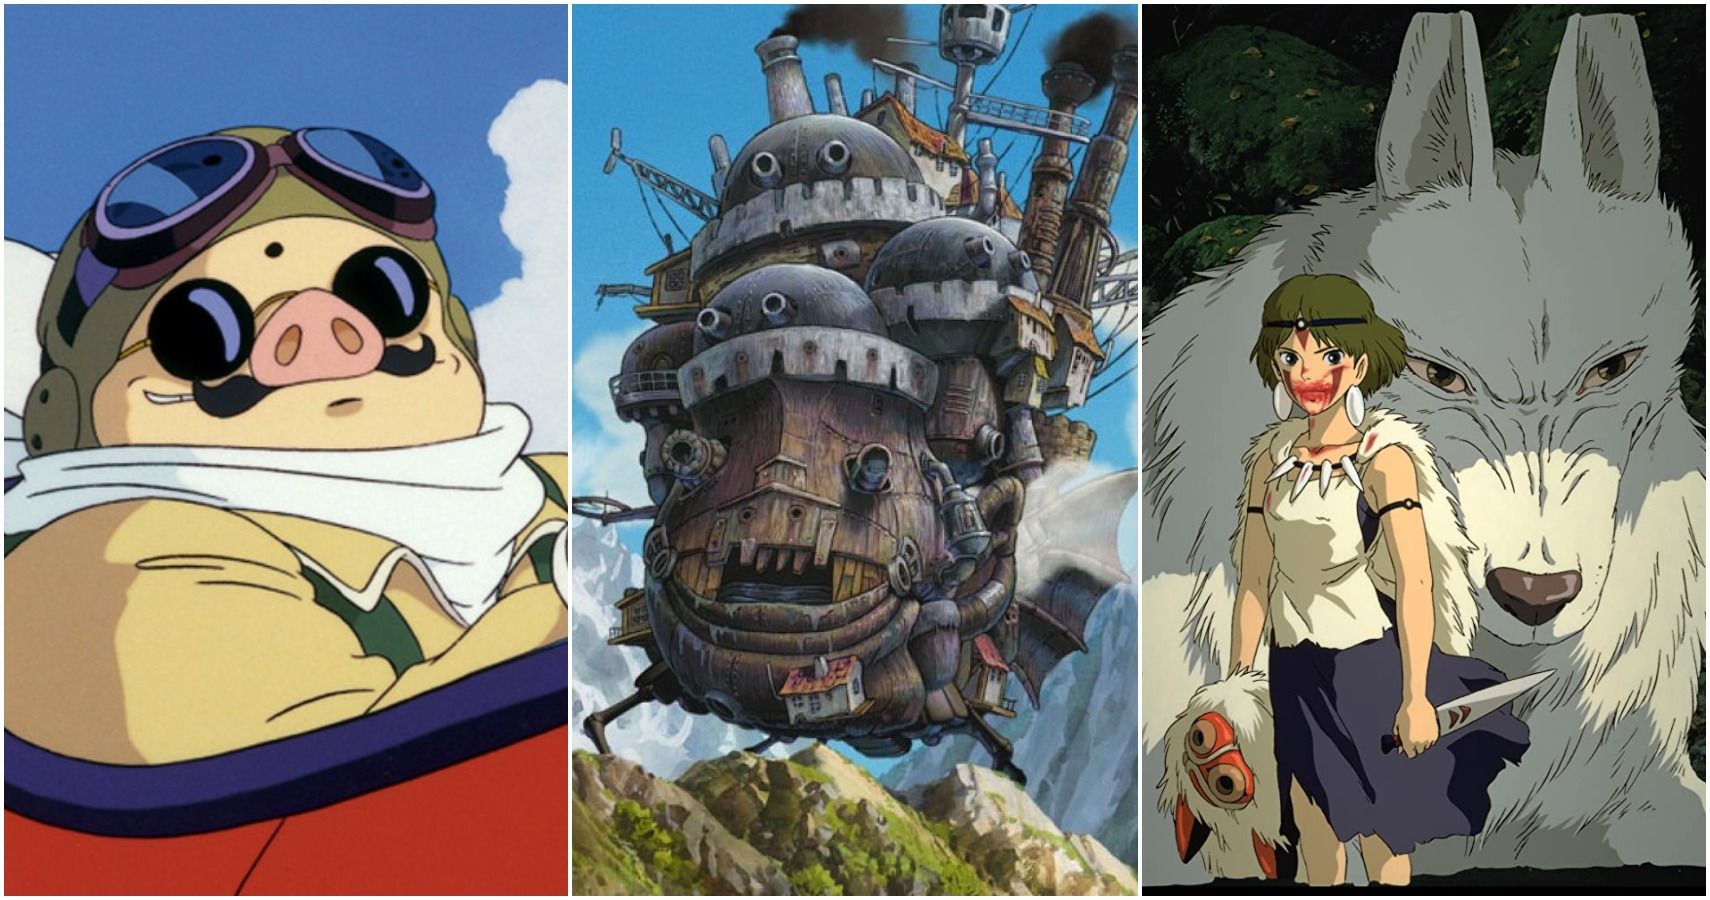 10 Studio Ghibli Movies With The Greatest Scores | ScreenRant